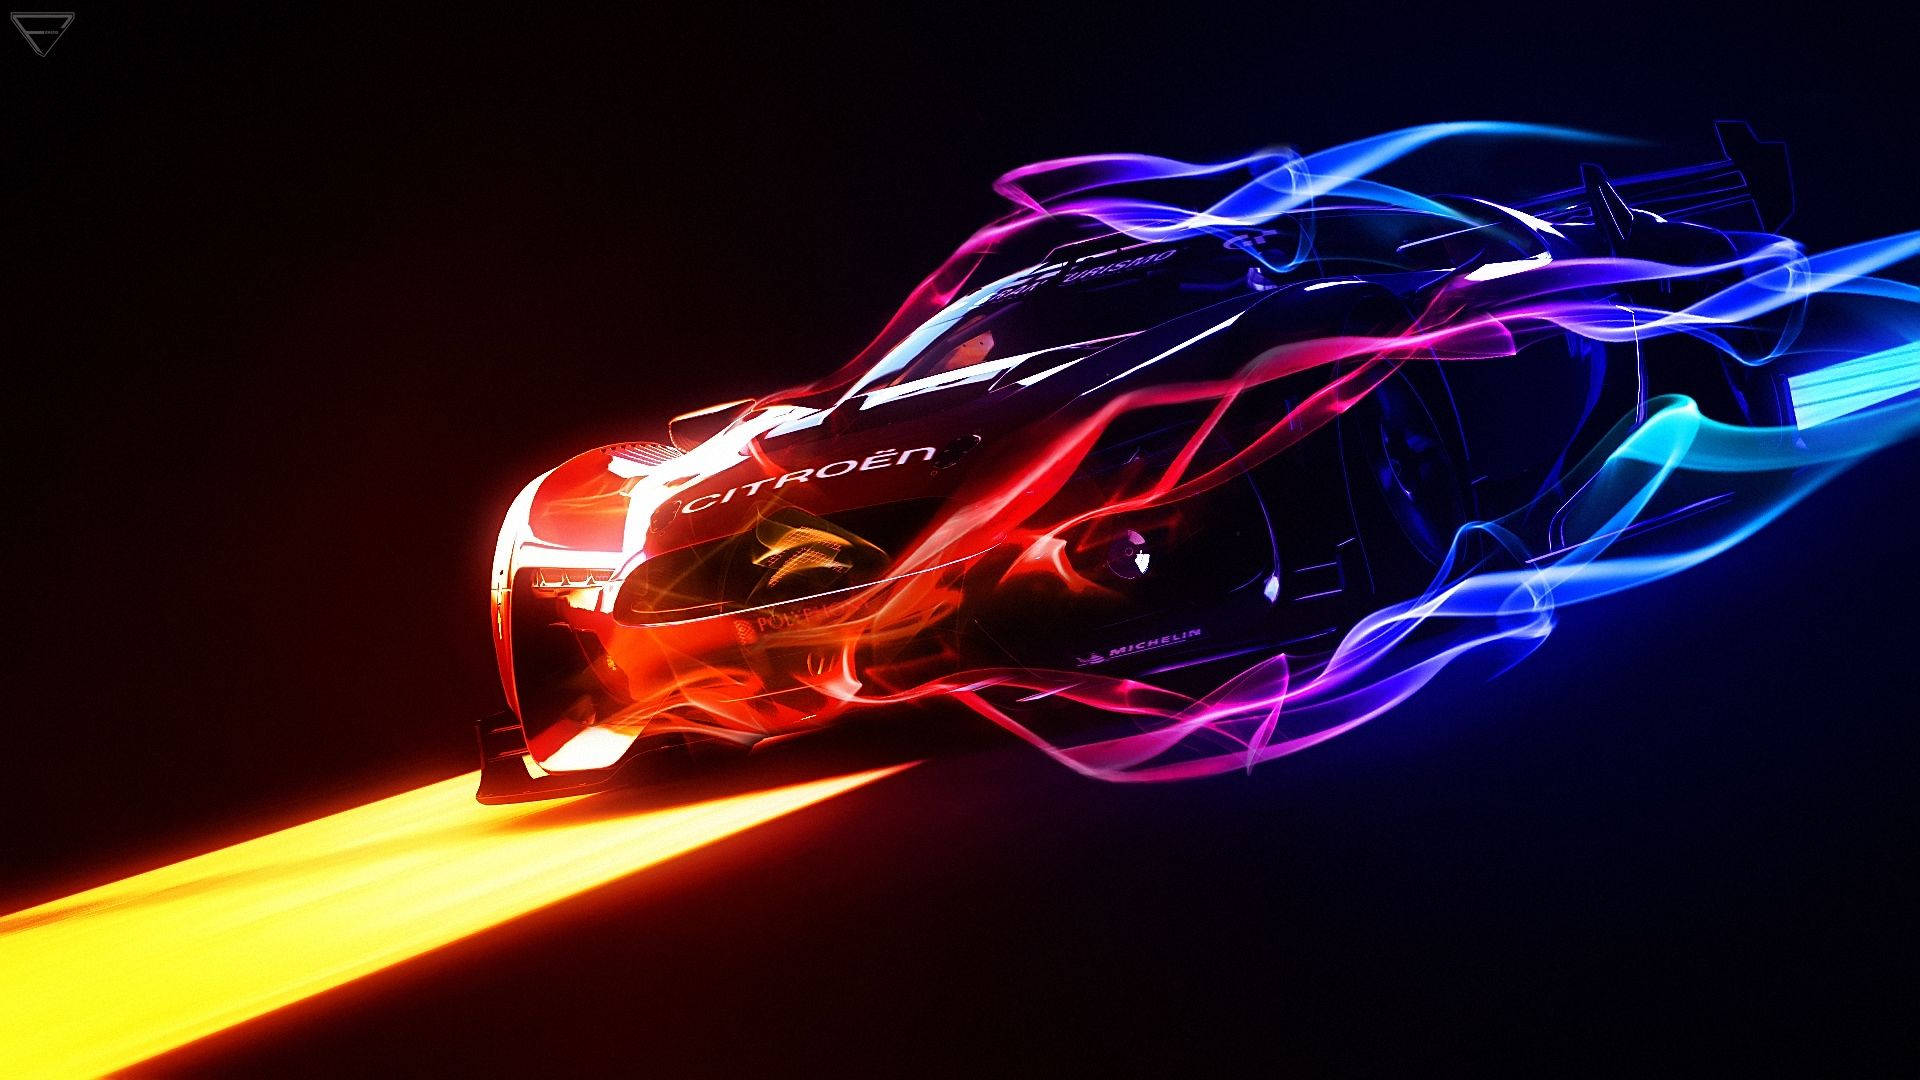 Fiery Gt Citroen Car For Gaming Laptop Background